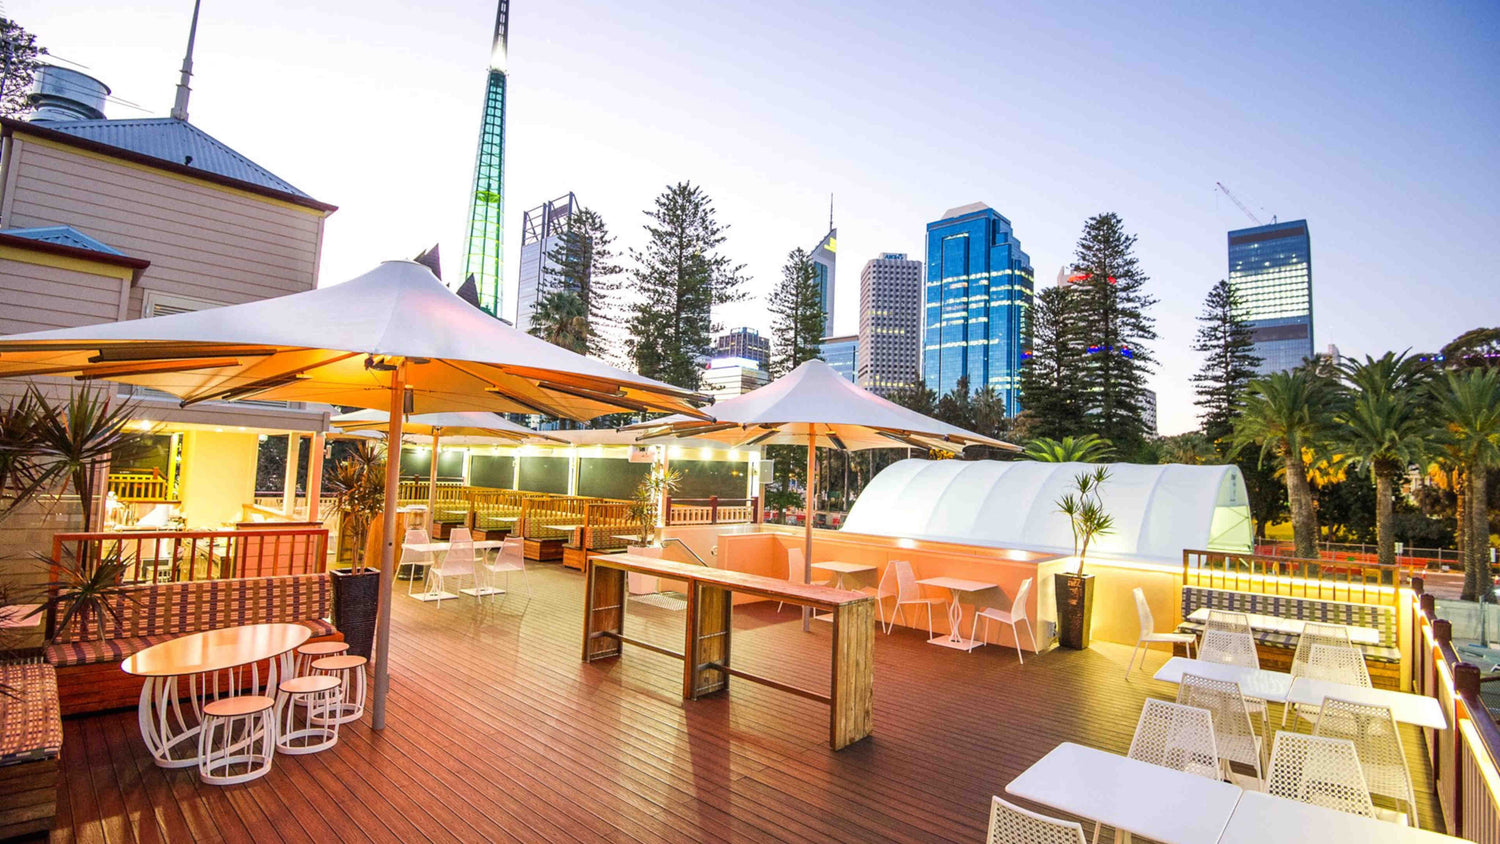 Trex Transcend Spiced Rum composite decking with Perth skyline